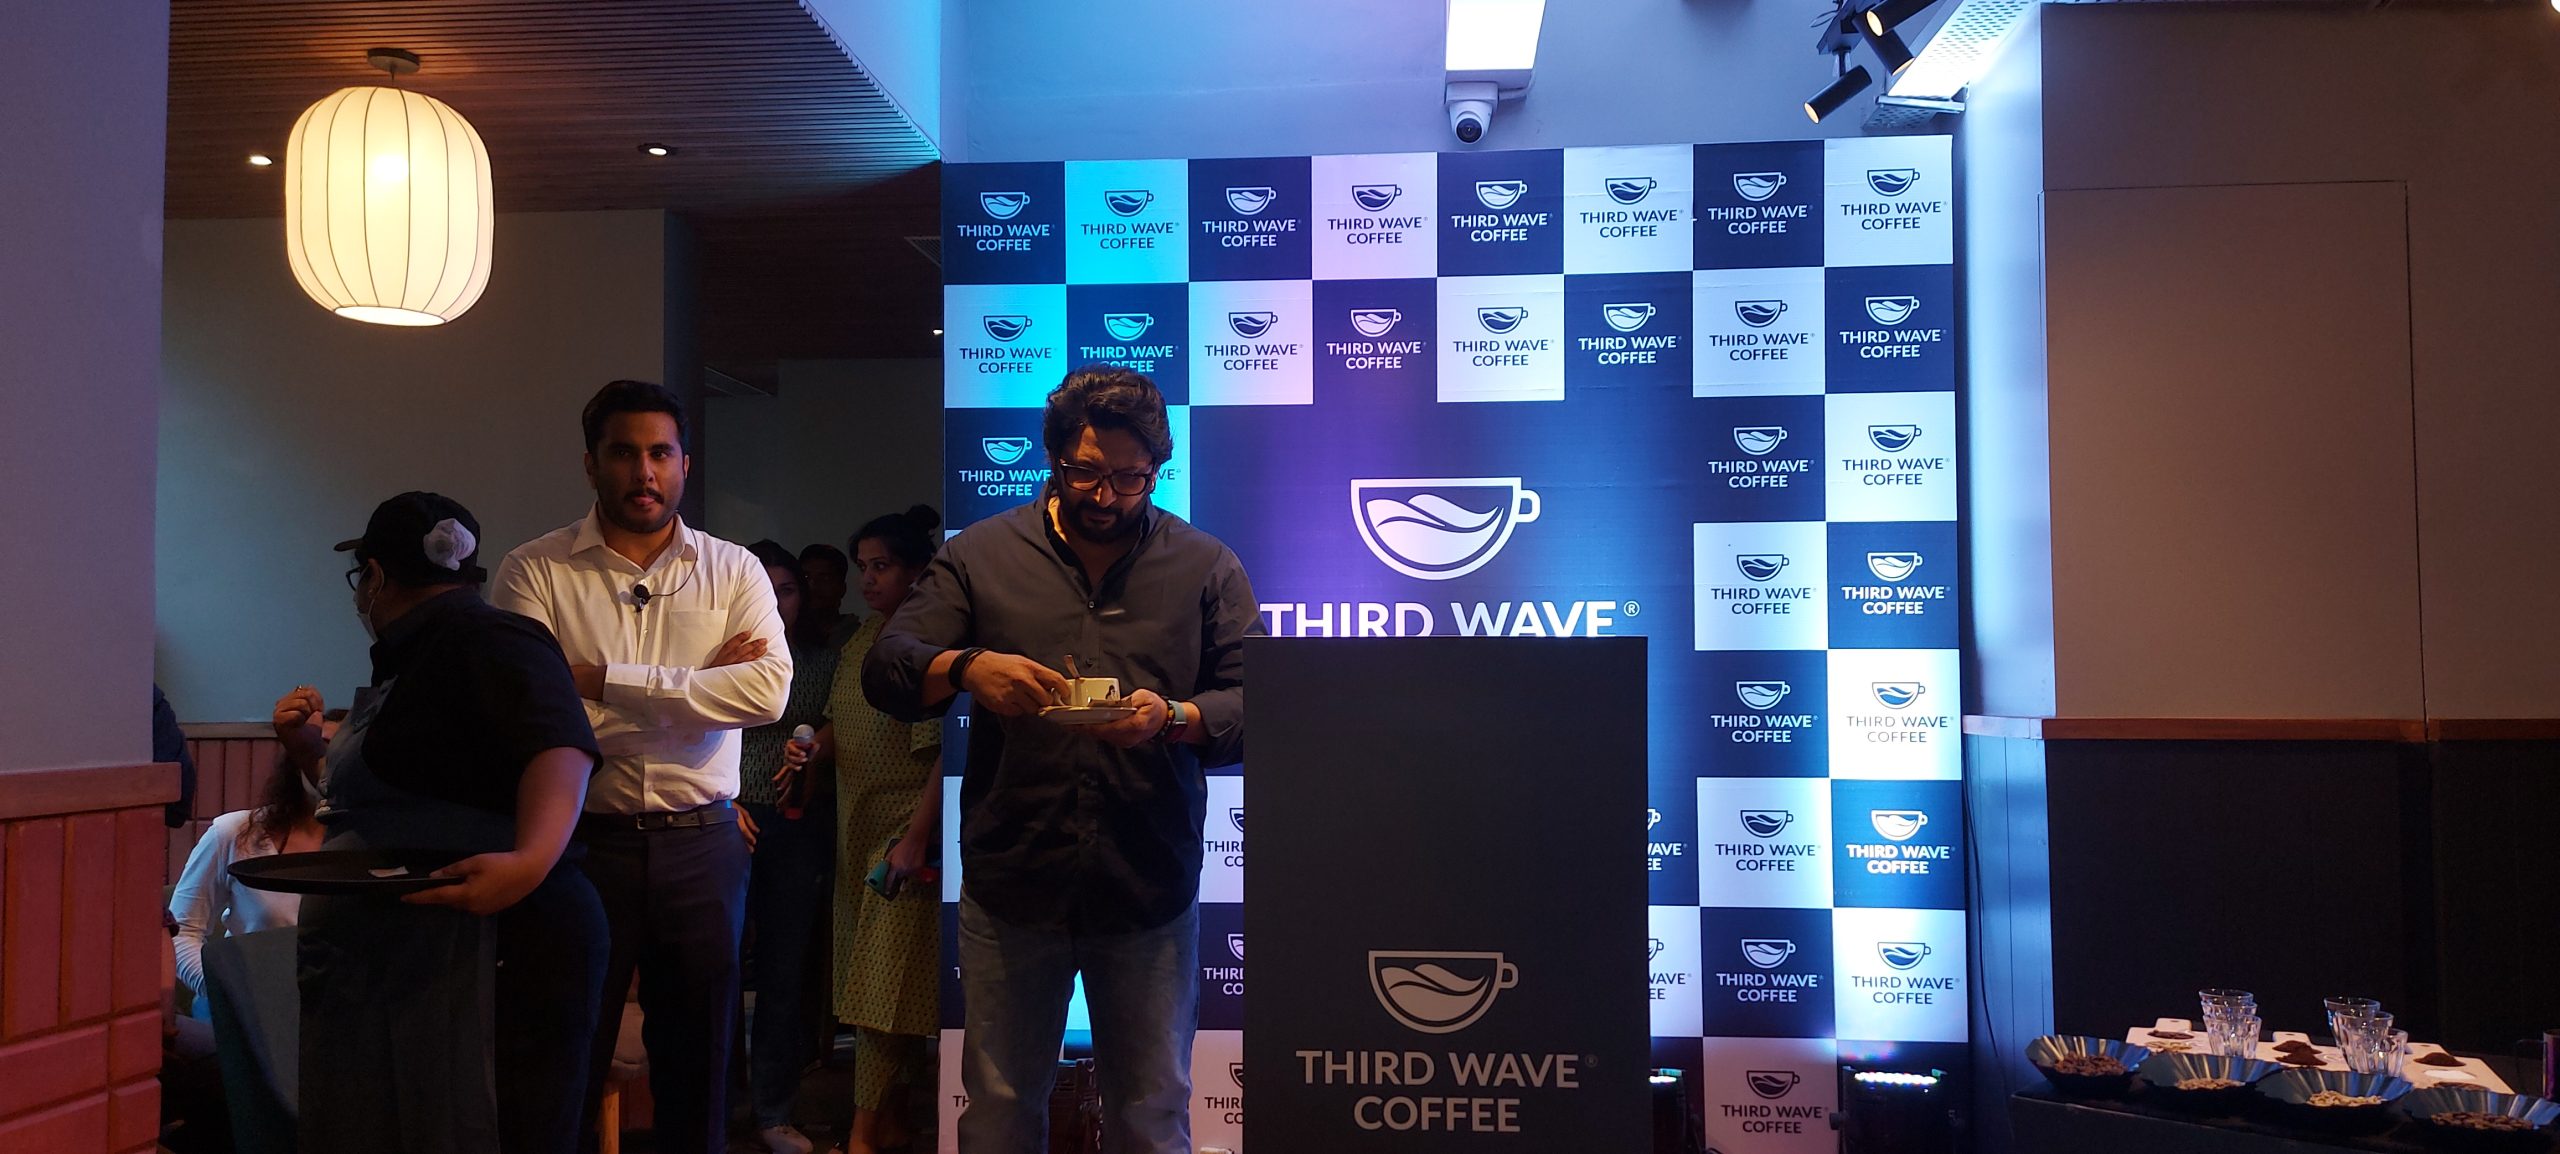 “Third Wave Coffee” plans to open 30 cafes in Mumbai within a year!